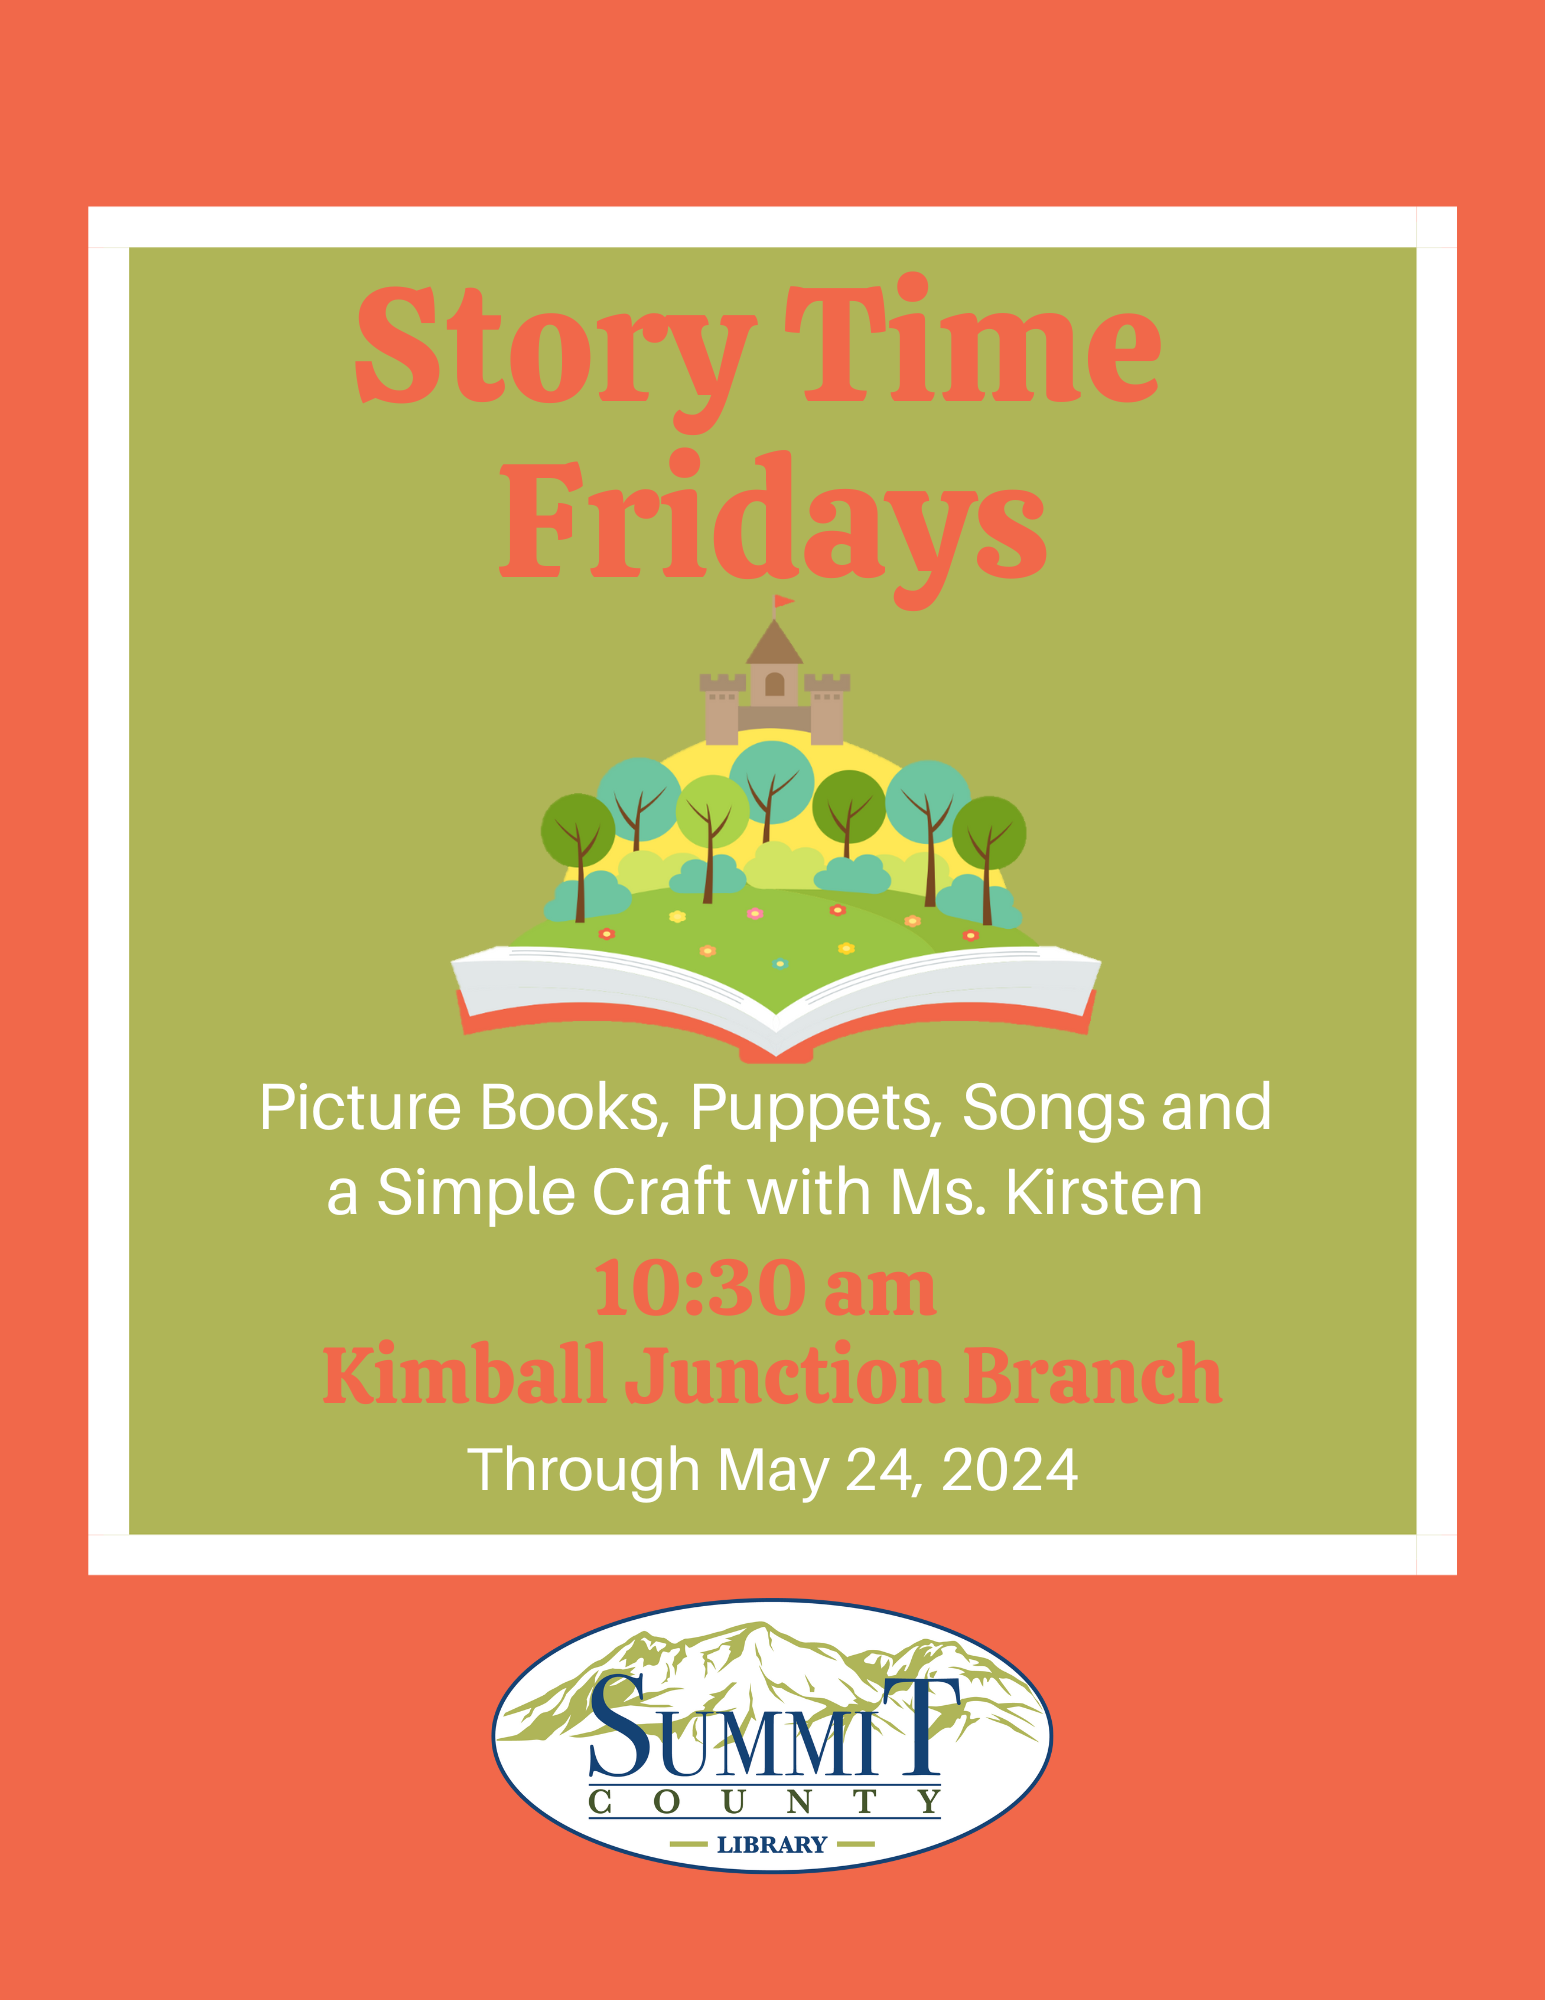 Story Time Fridays, Kimball Junction Branch